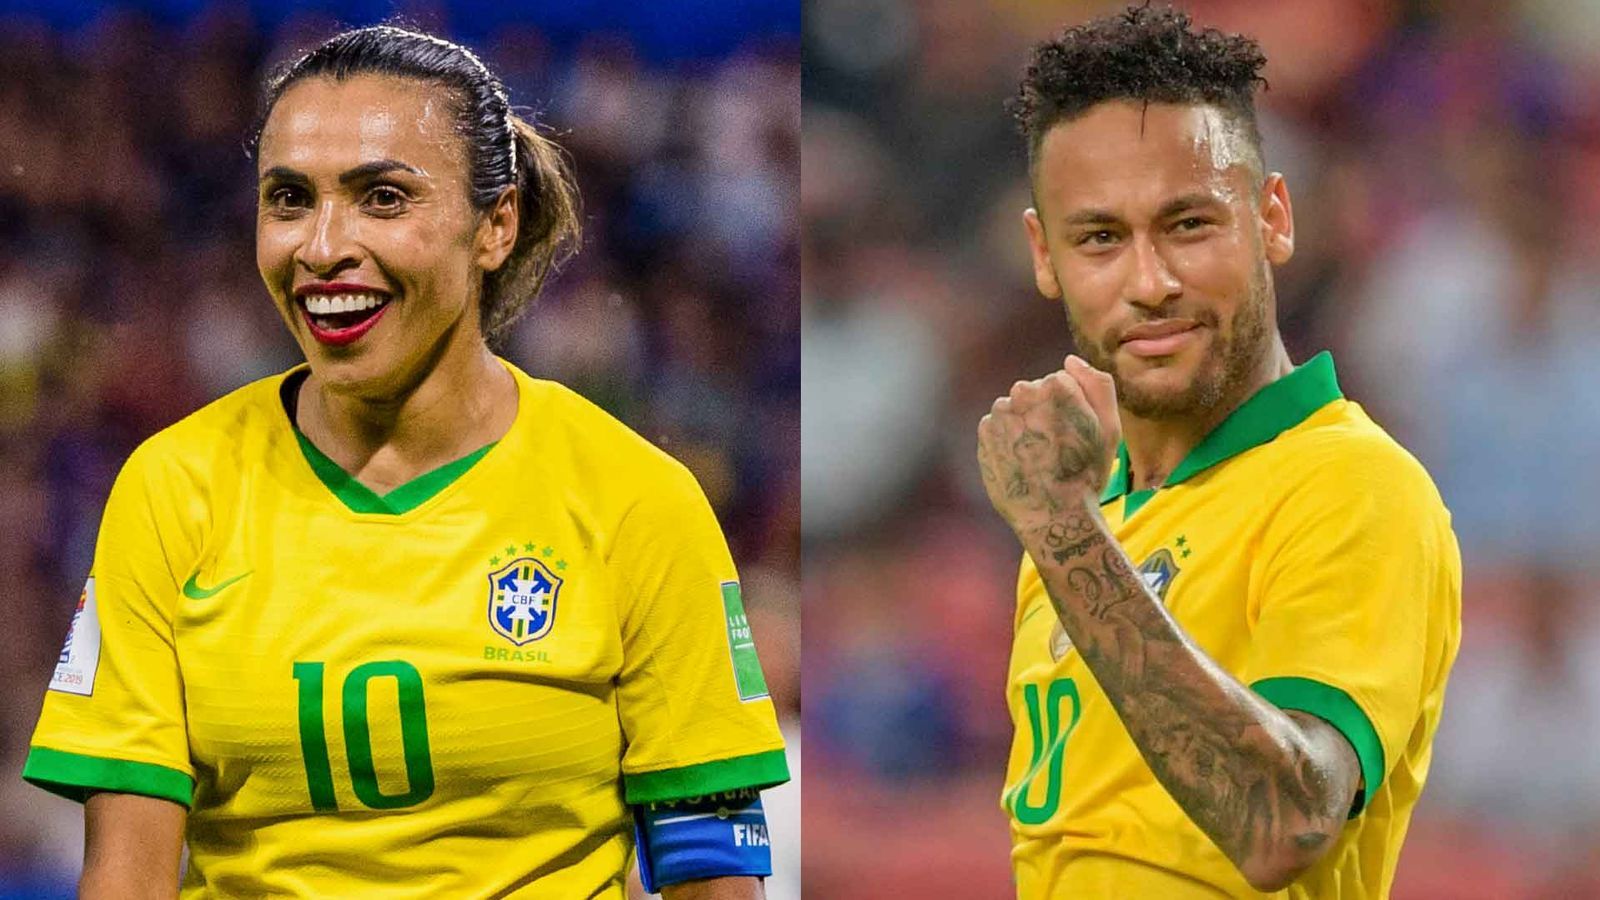 Brazil women footballers to receive equal pay